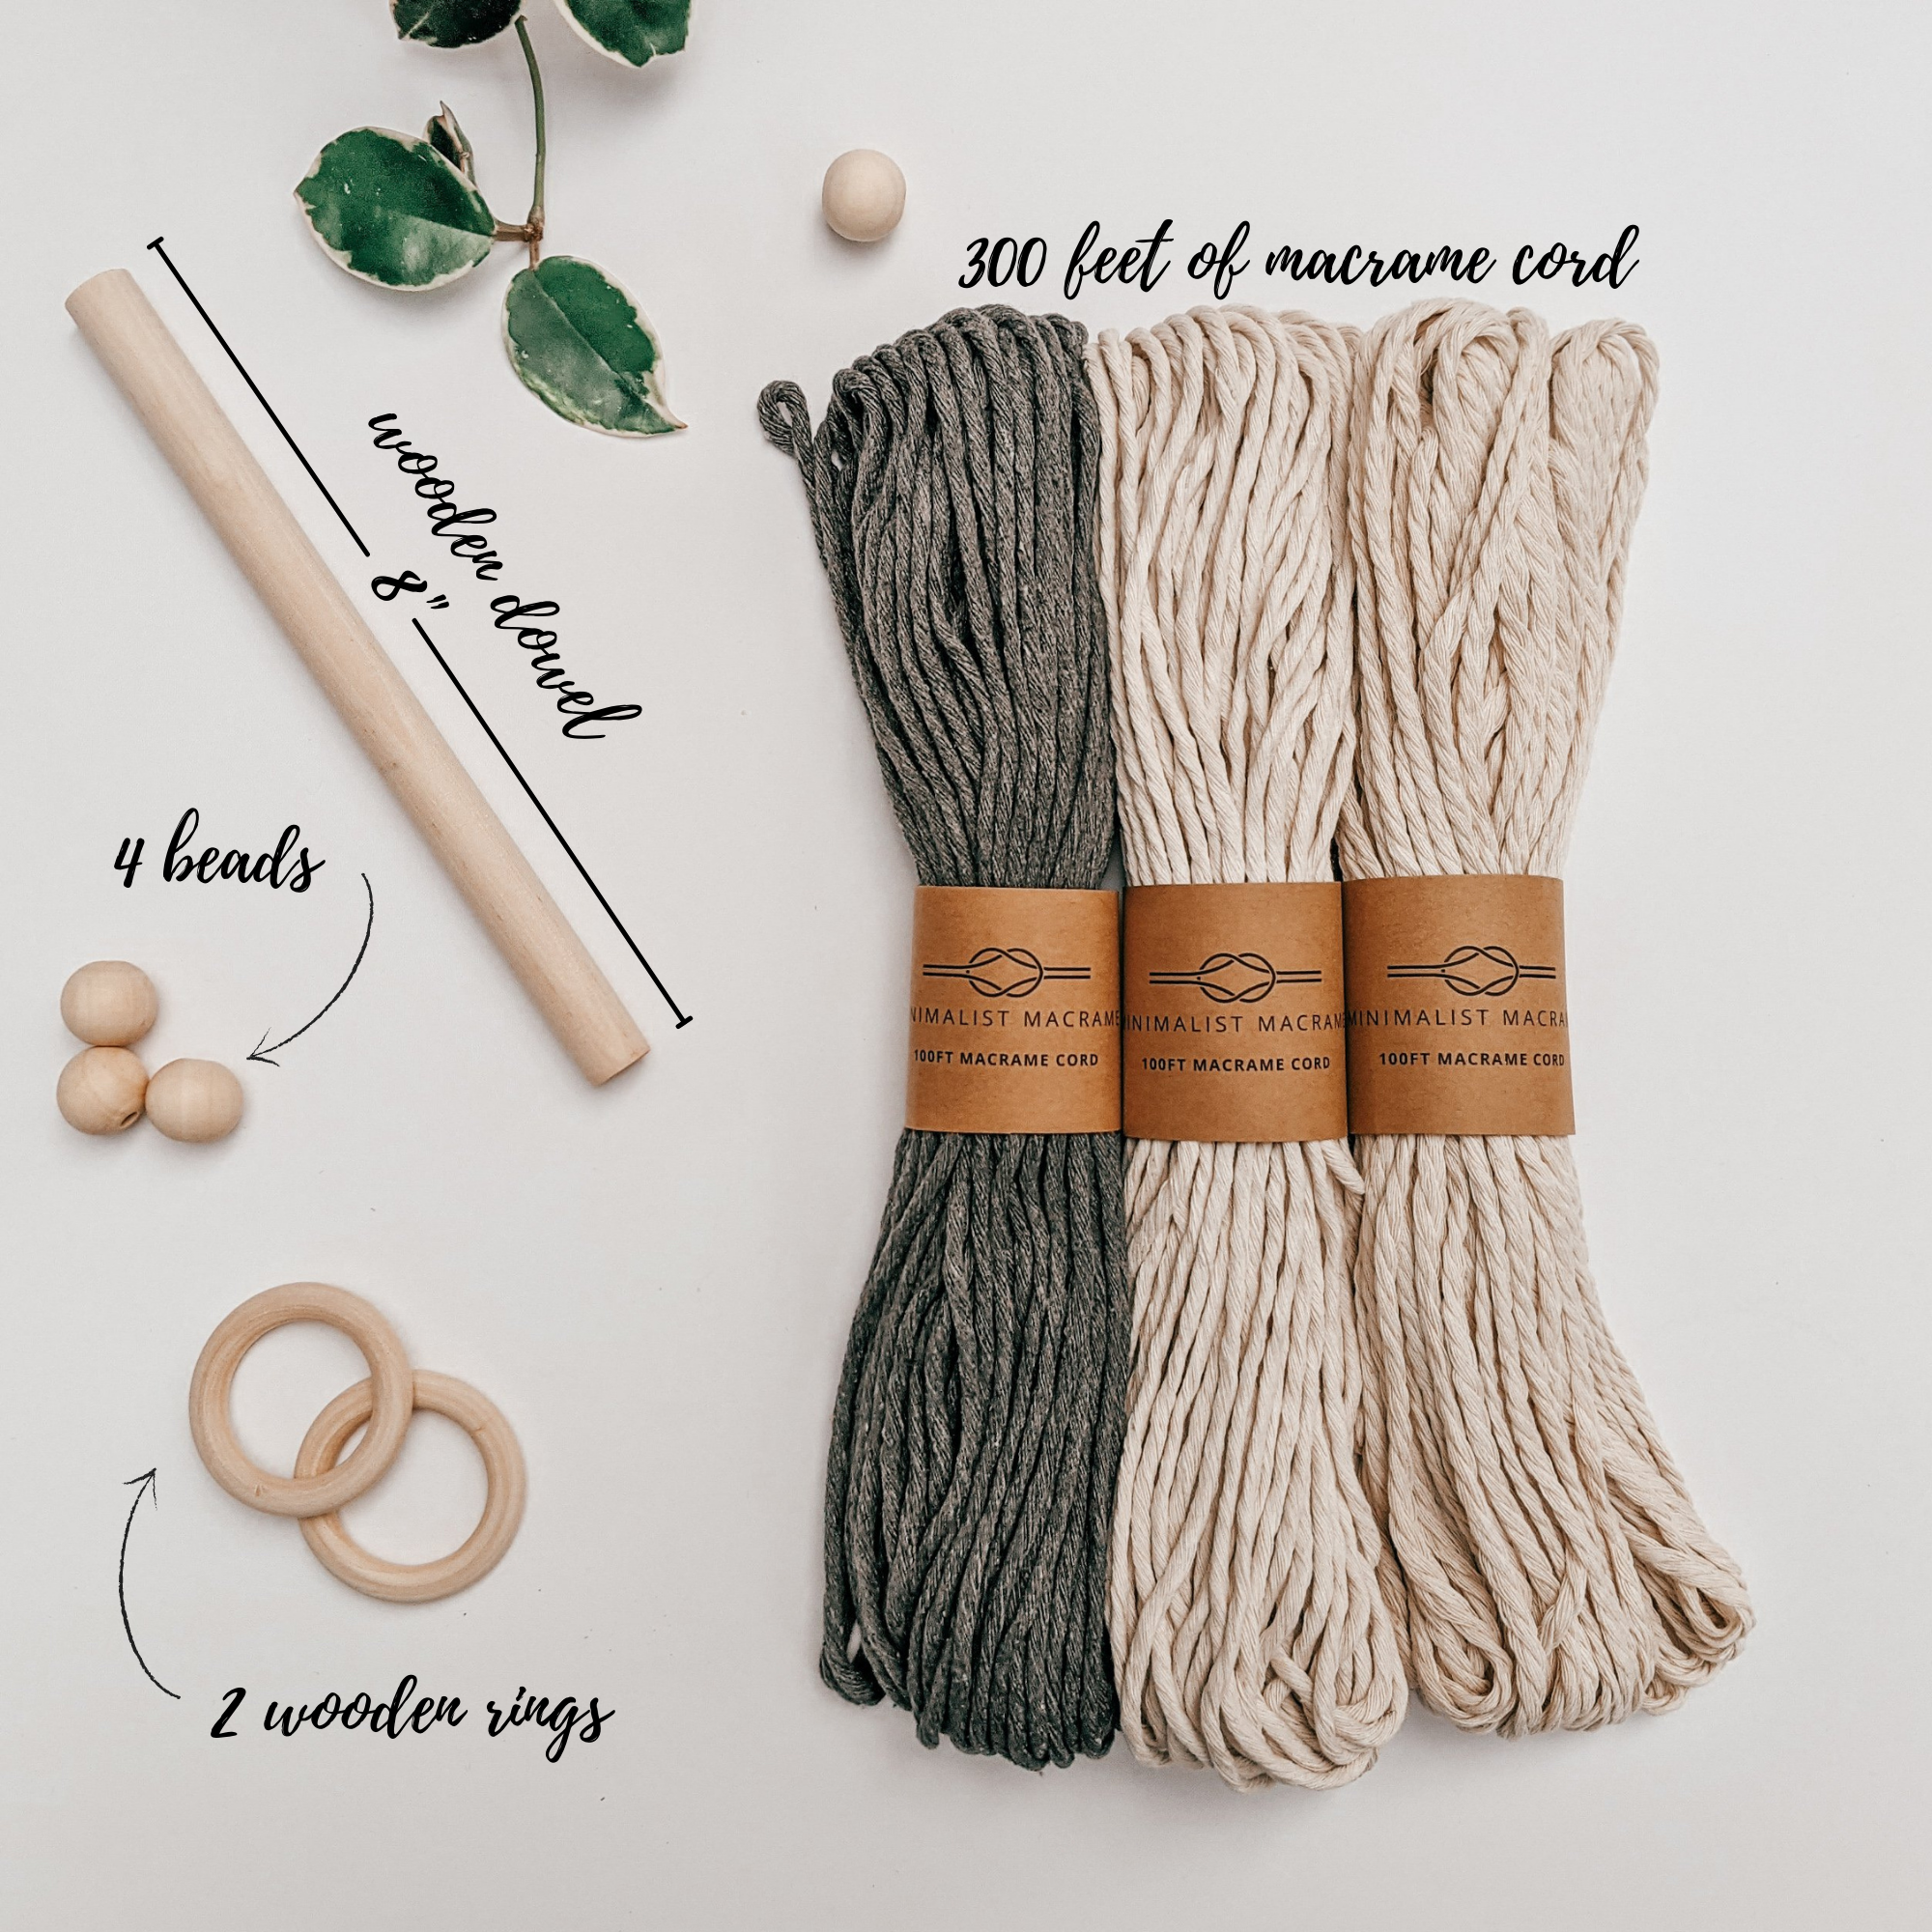 Macrame Cord Guide - Which macramé cord should I use?